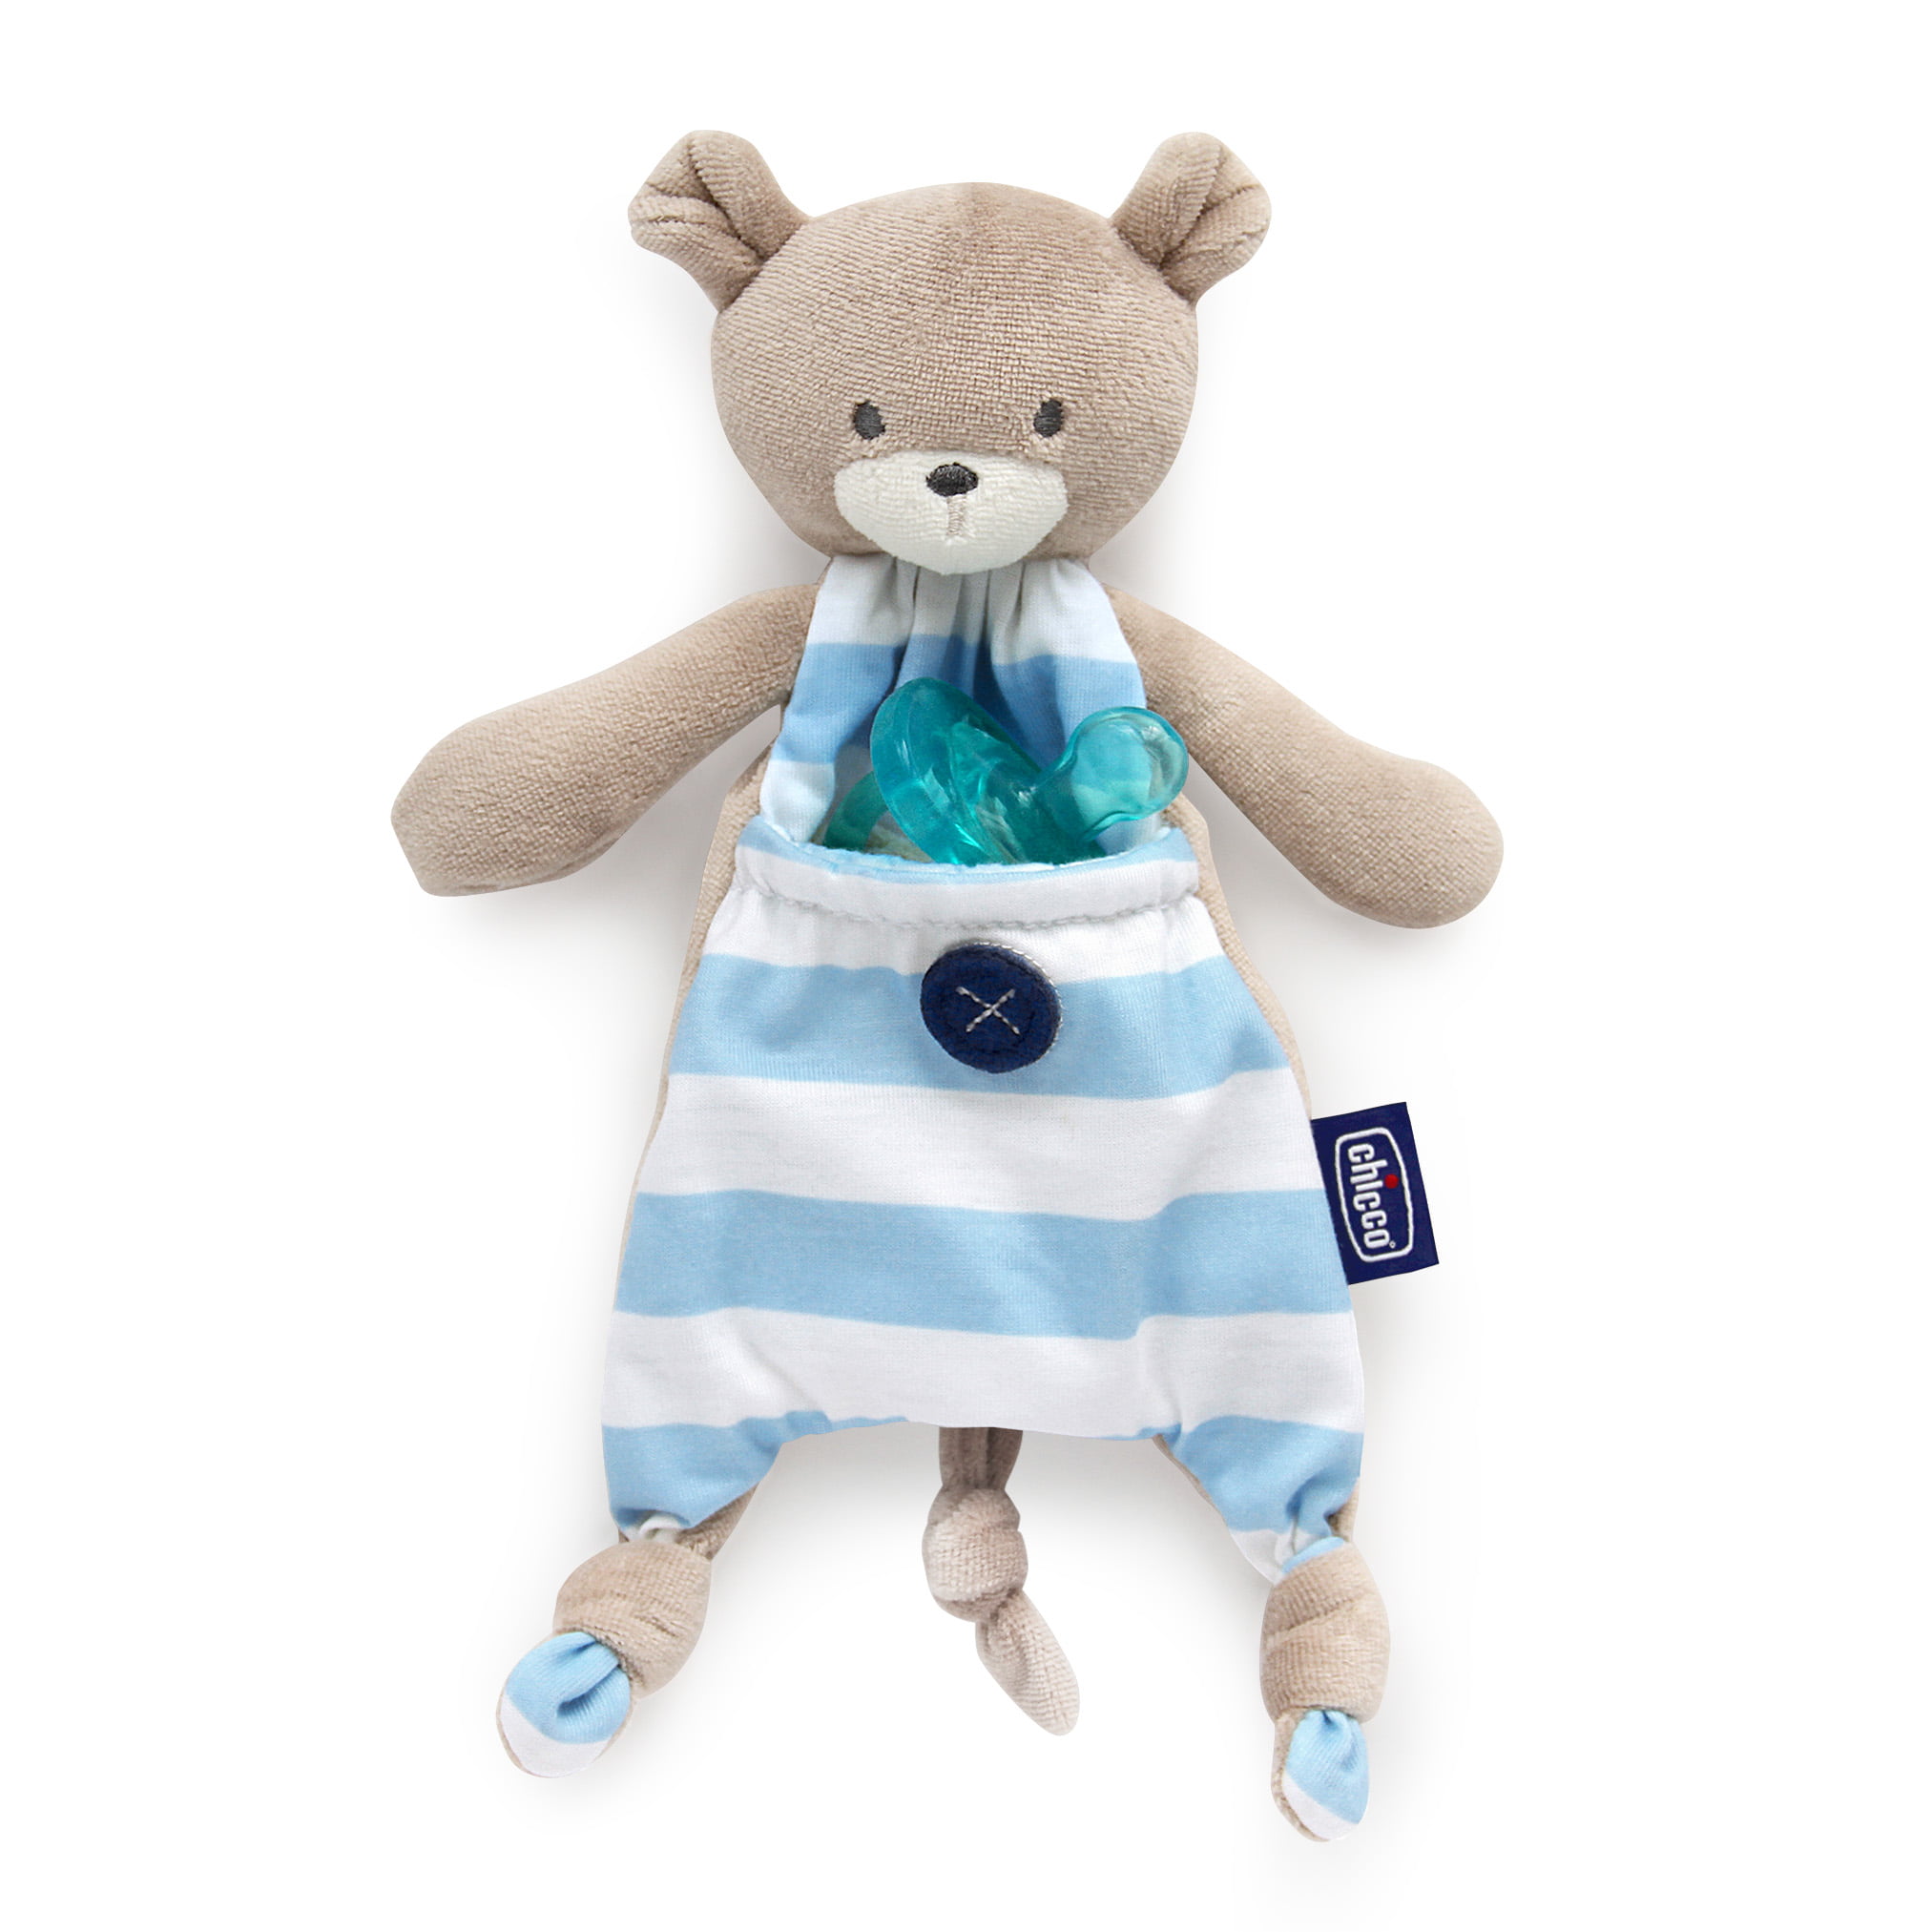 Chicco Pocket Buddies Soft Pacifier Lovey, Blue Bear 